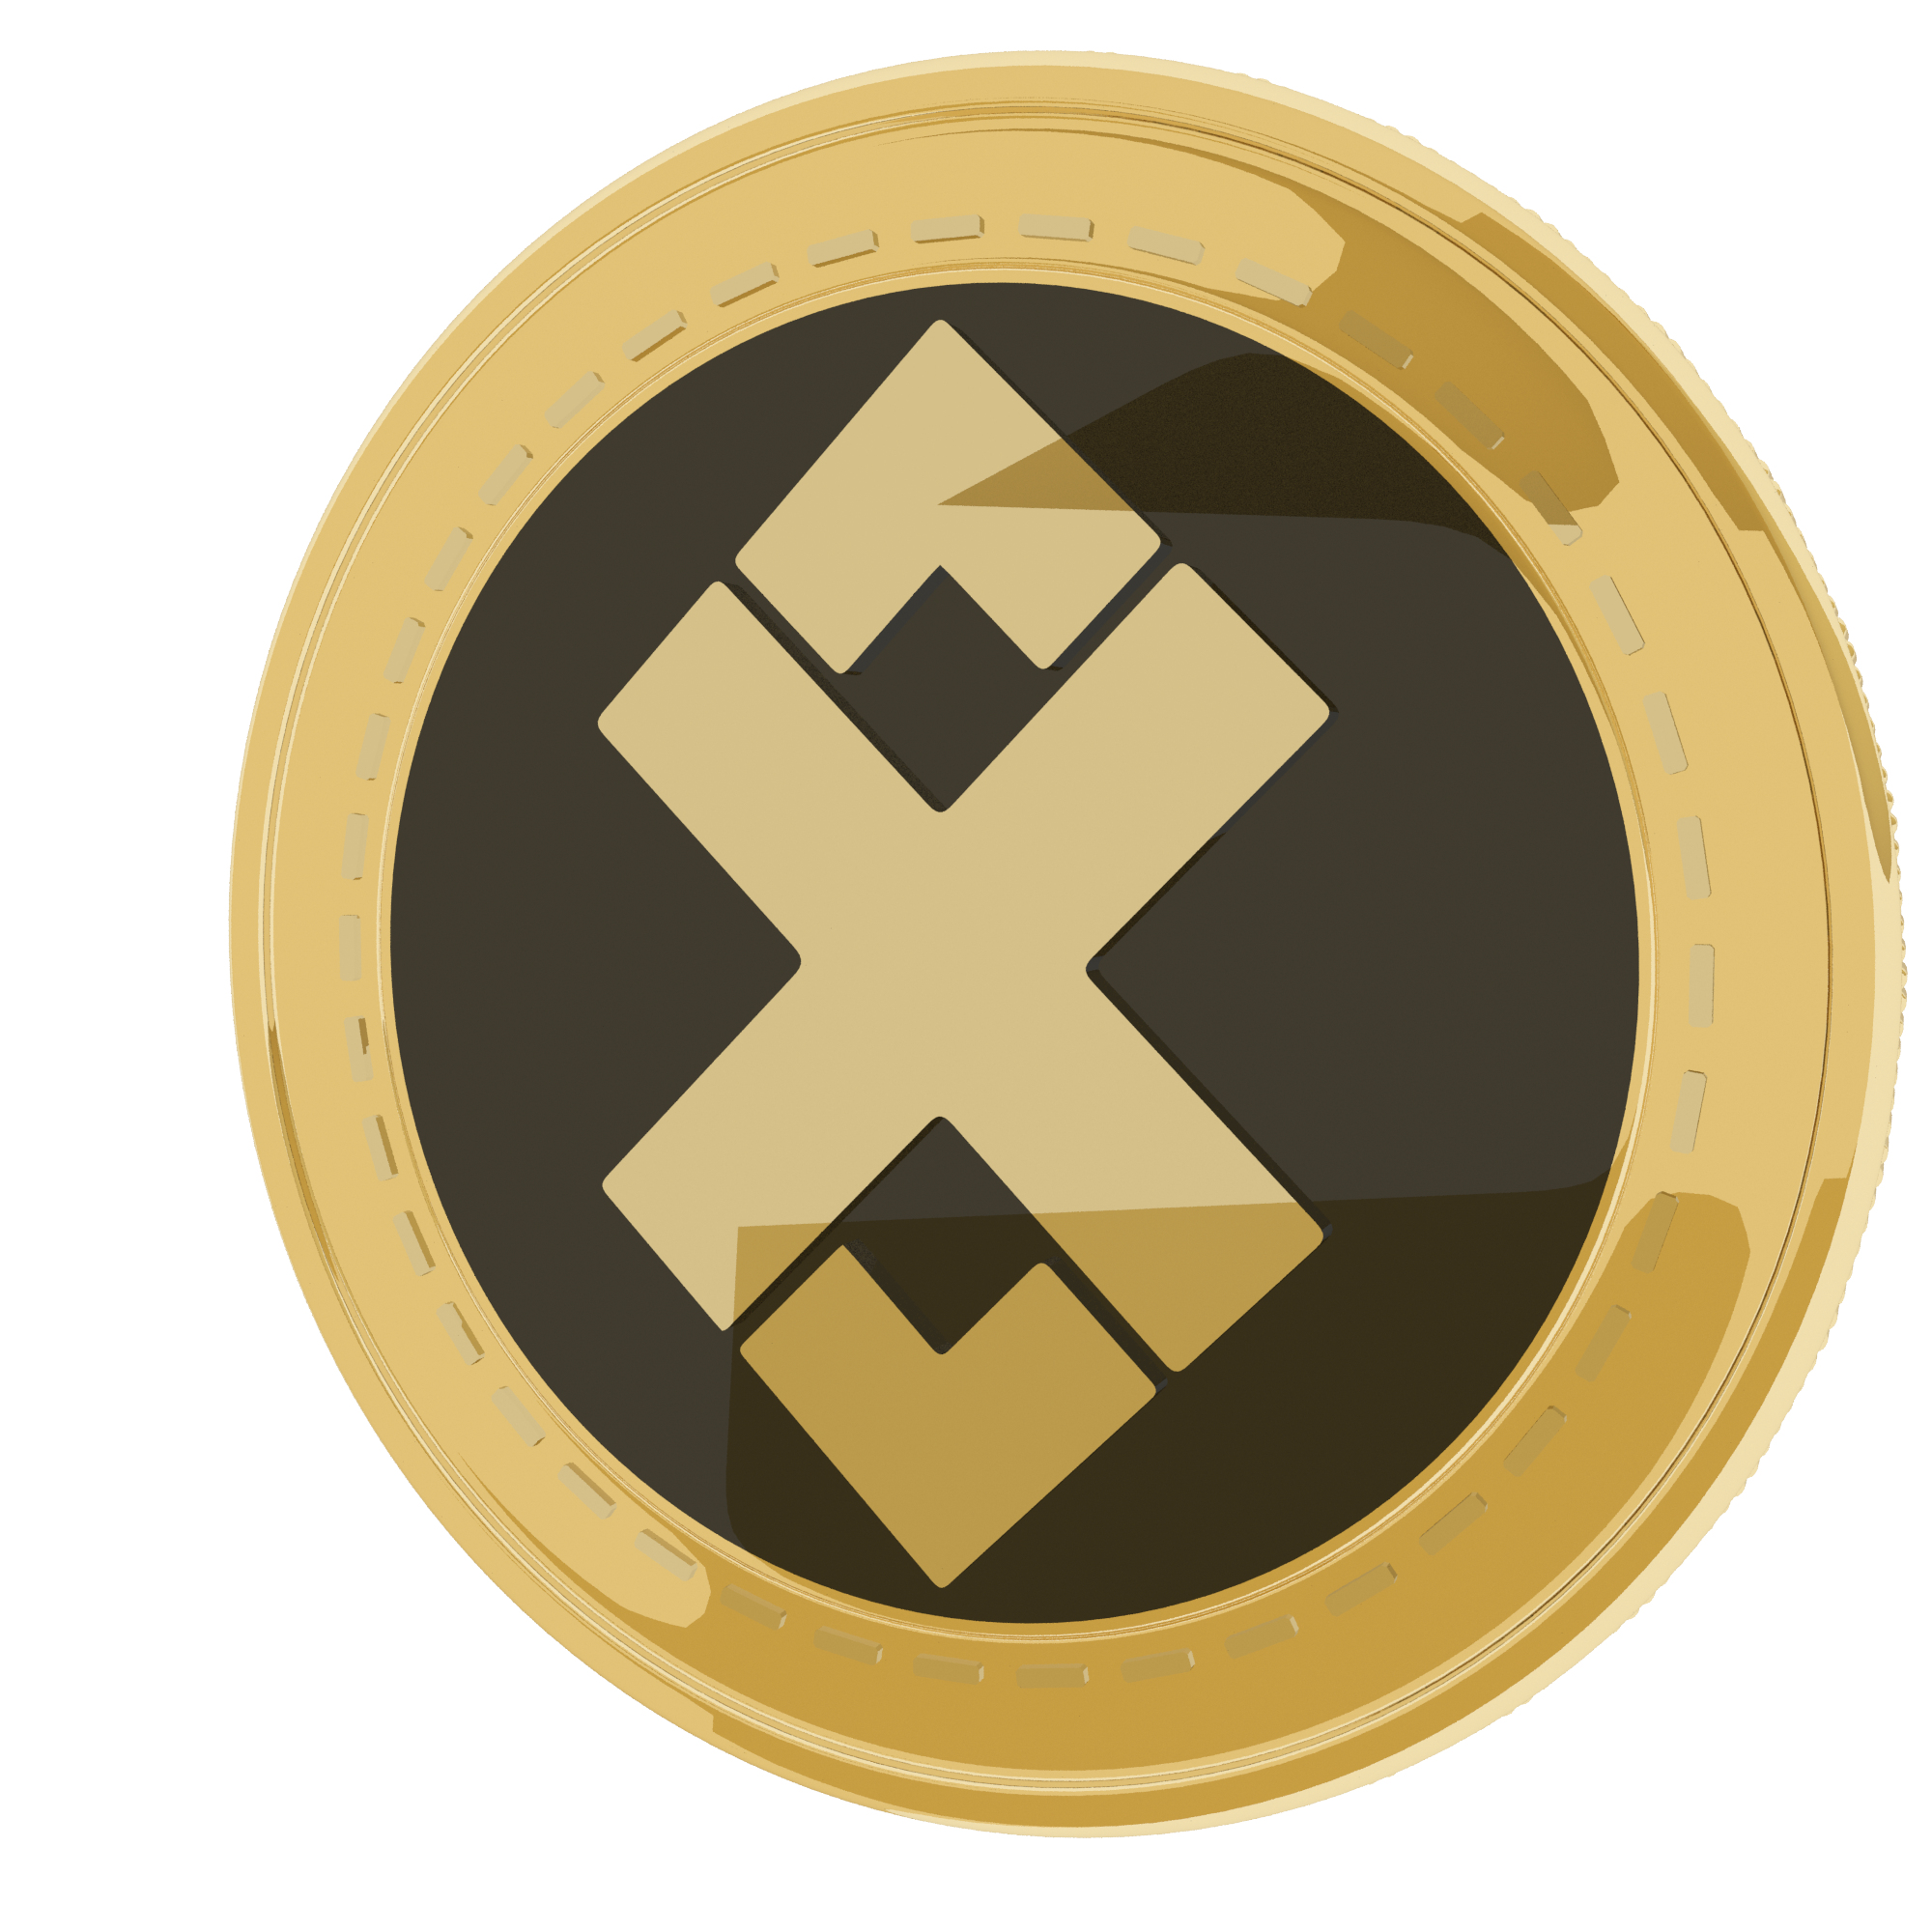 3D AdEx Cryptocurrency Gold Coin model - TurboSquid 1765045